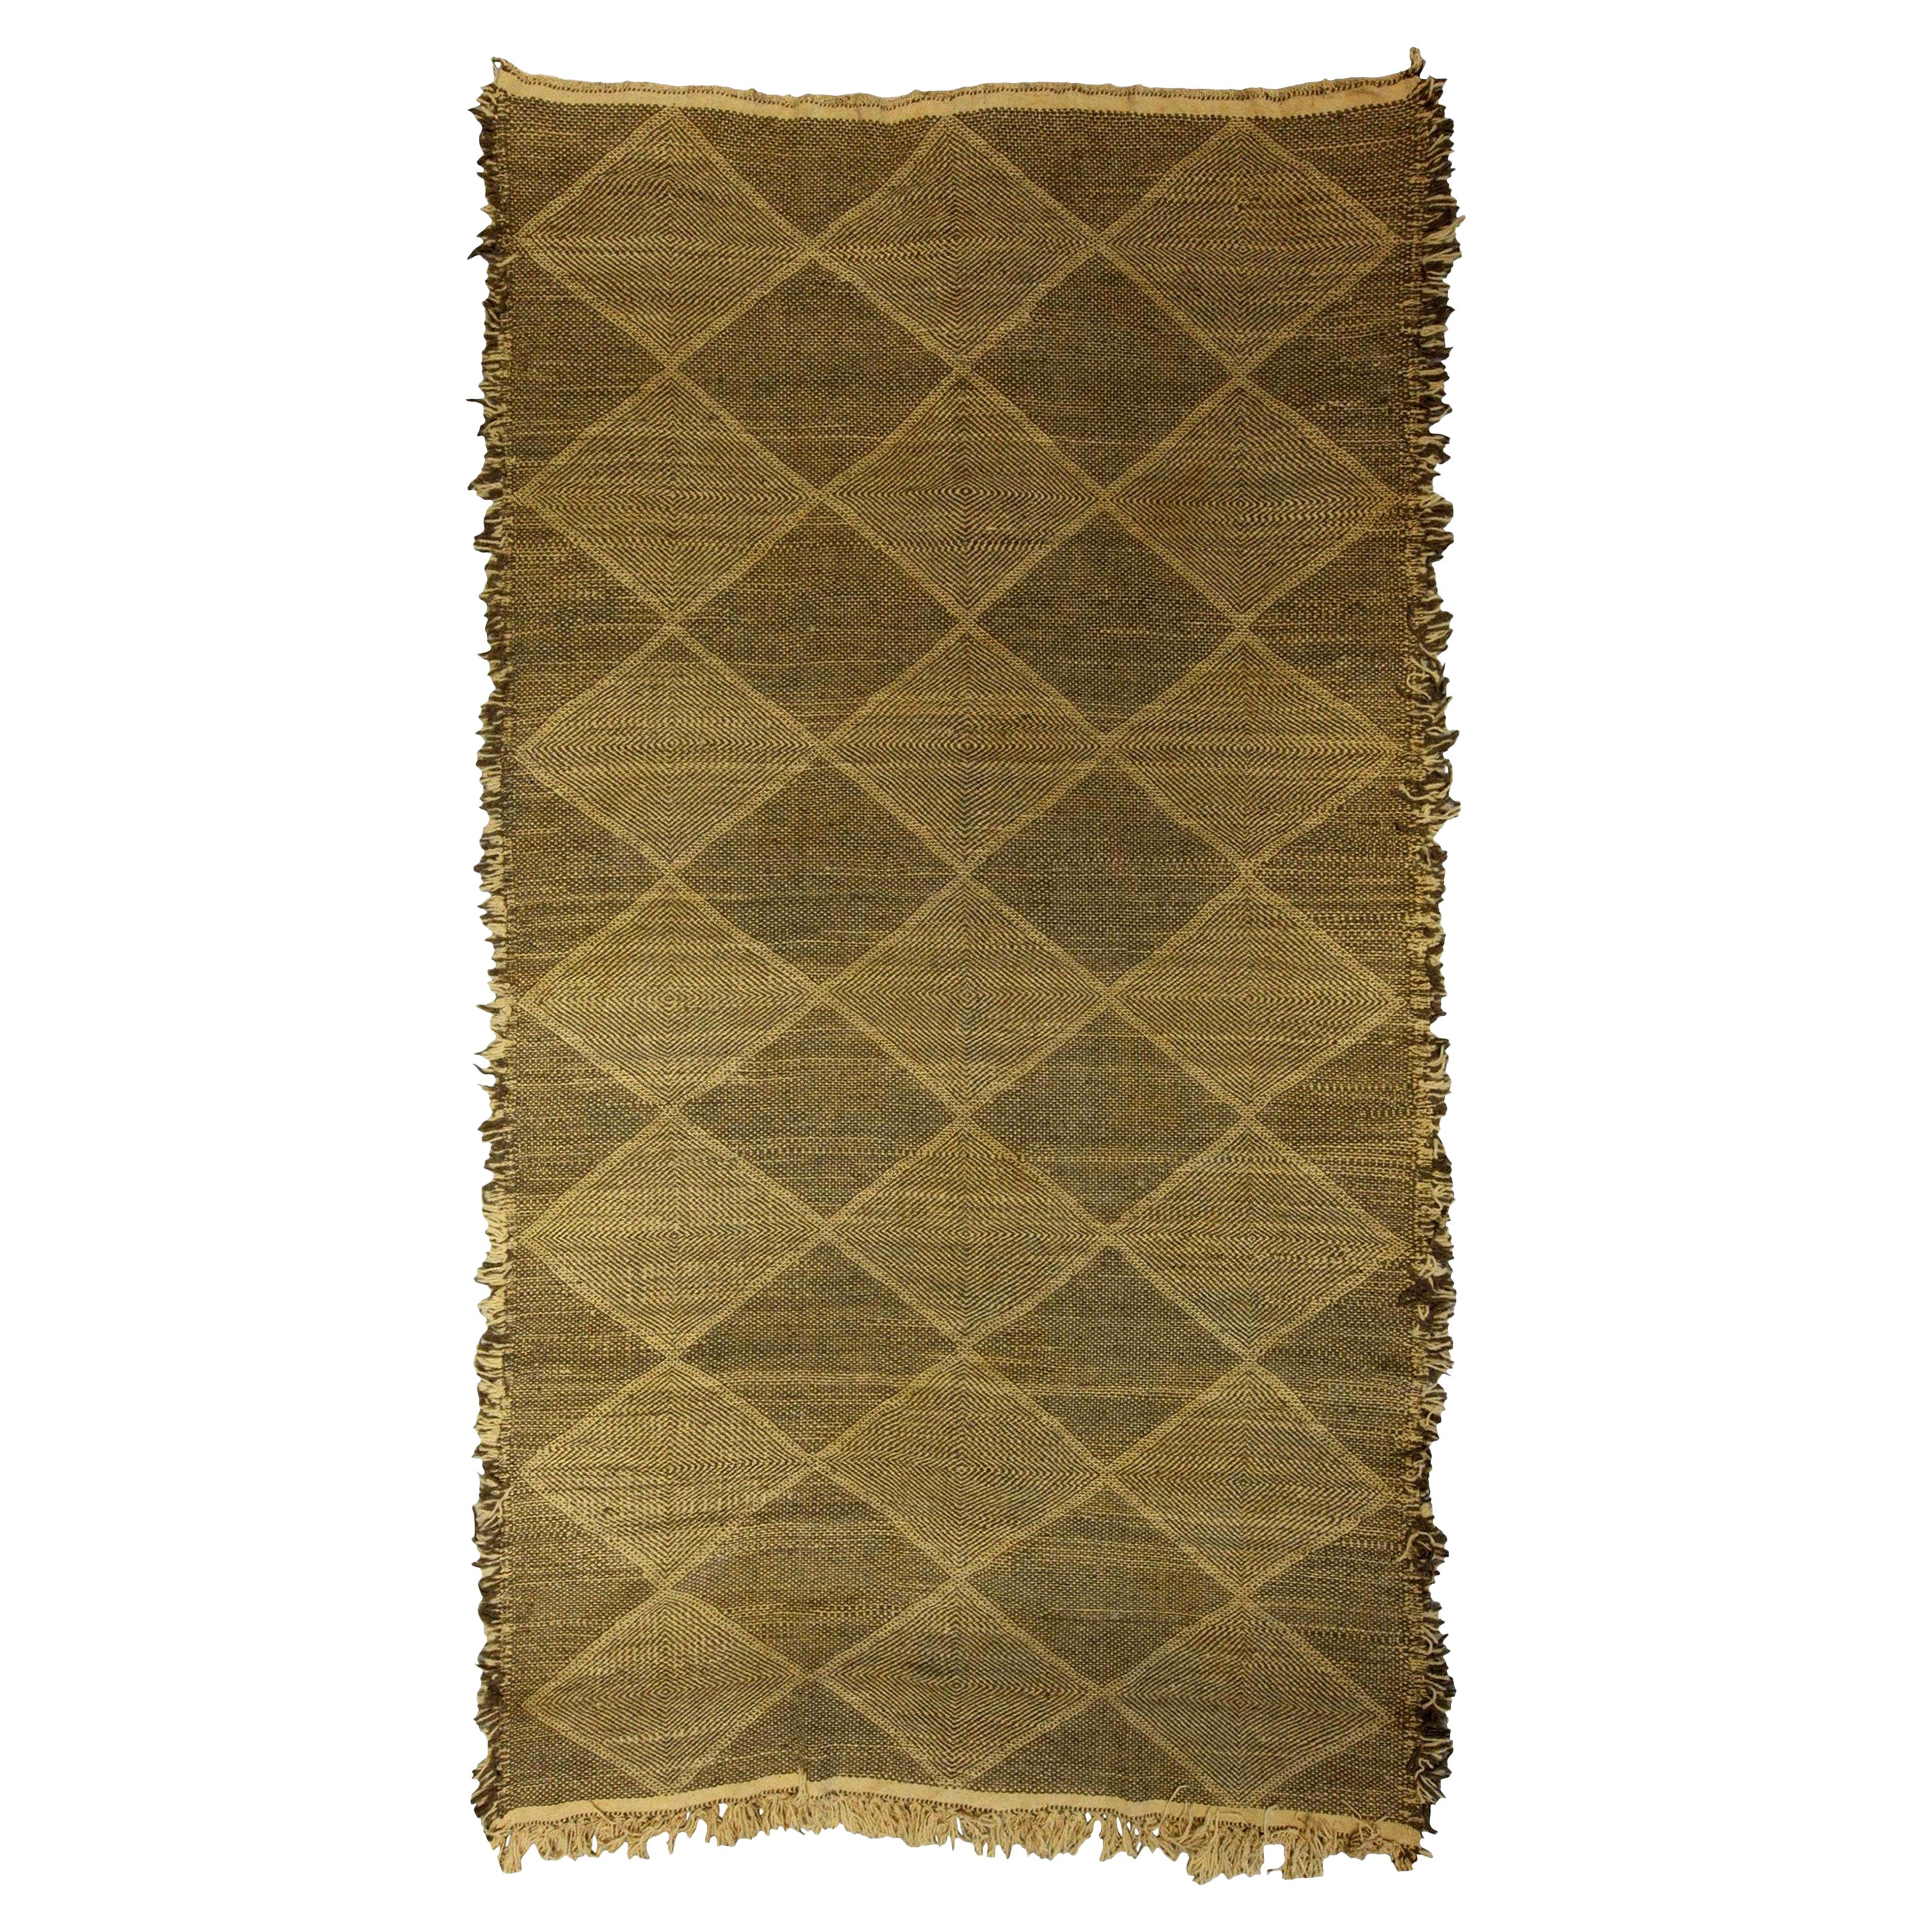 Contemporary Diamond Shaped Brown and Beige Flat-Weave Rug by Doris Leslie Blau For Sale